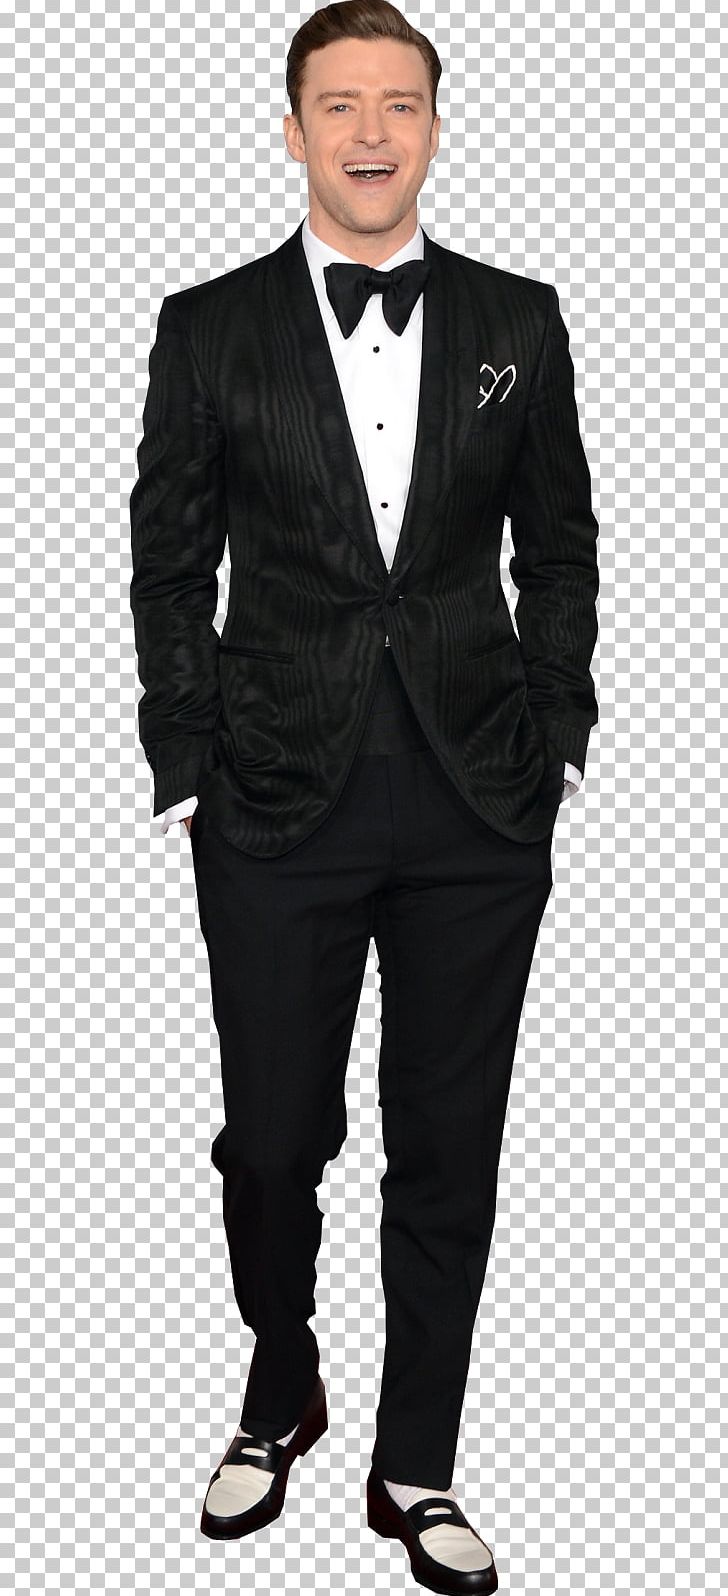 Tuxedo Tobacco Smoking Smoking Jacket Black Tie PNG, Clipart, Black Tie, Business, Clothing, Coat, Commercial Law Free PNG Download